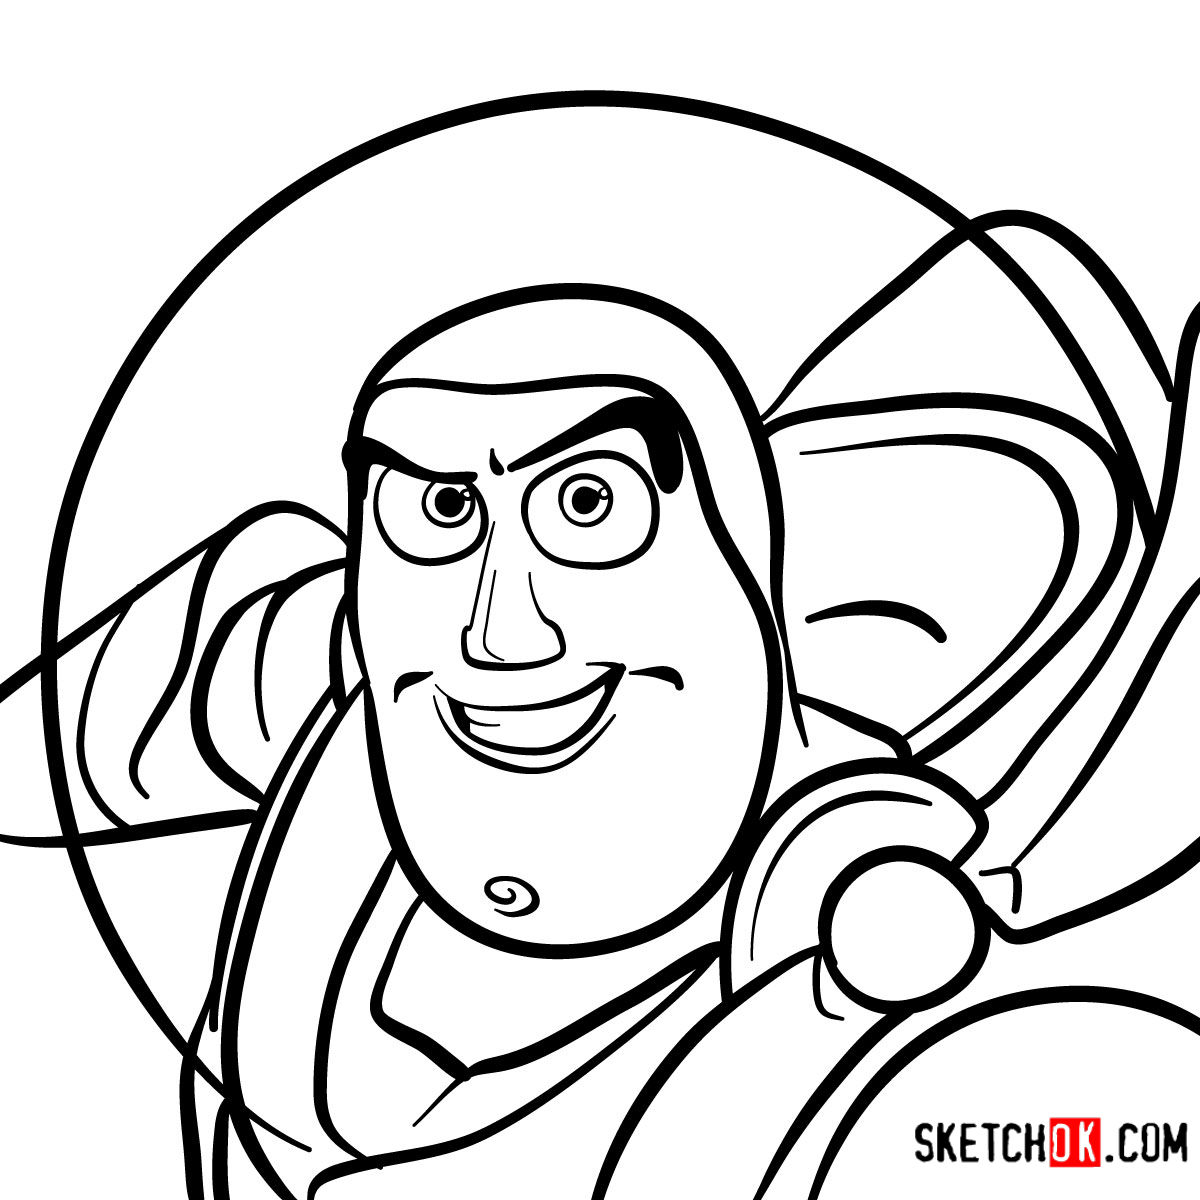 How To Draw Buzz Lightyear S Face Toy Story Step By Step